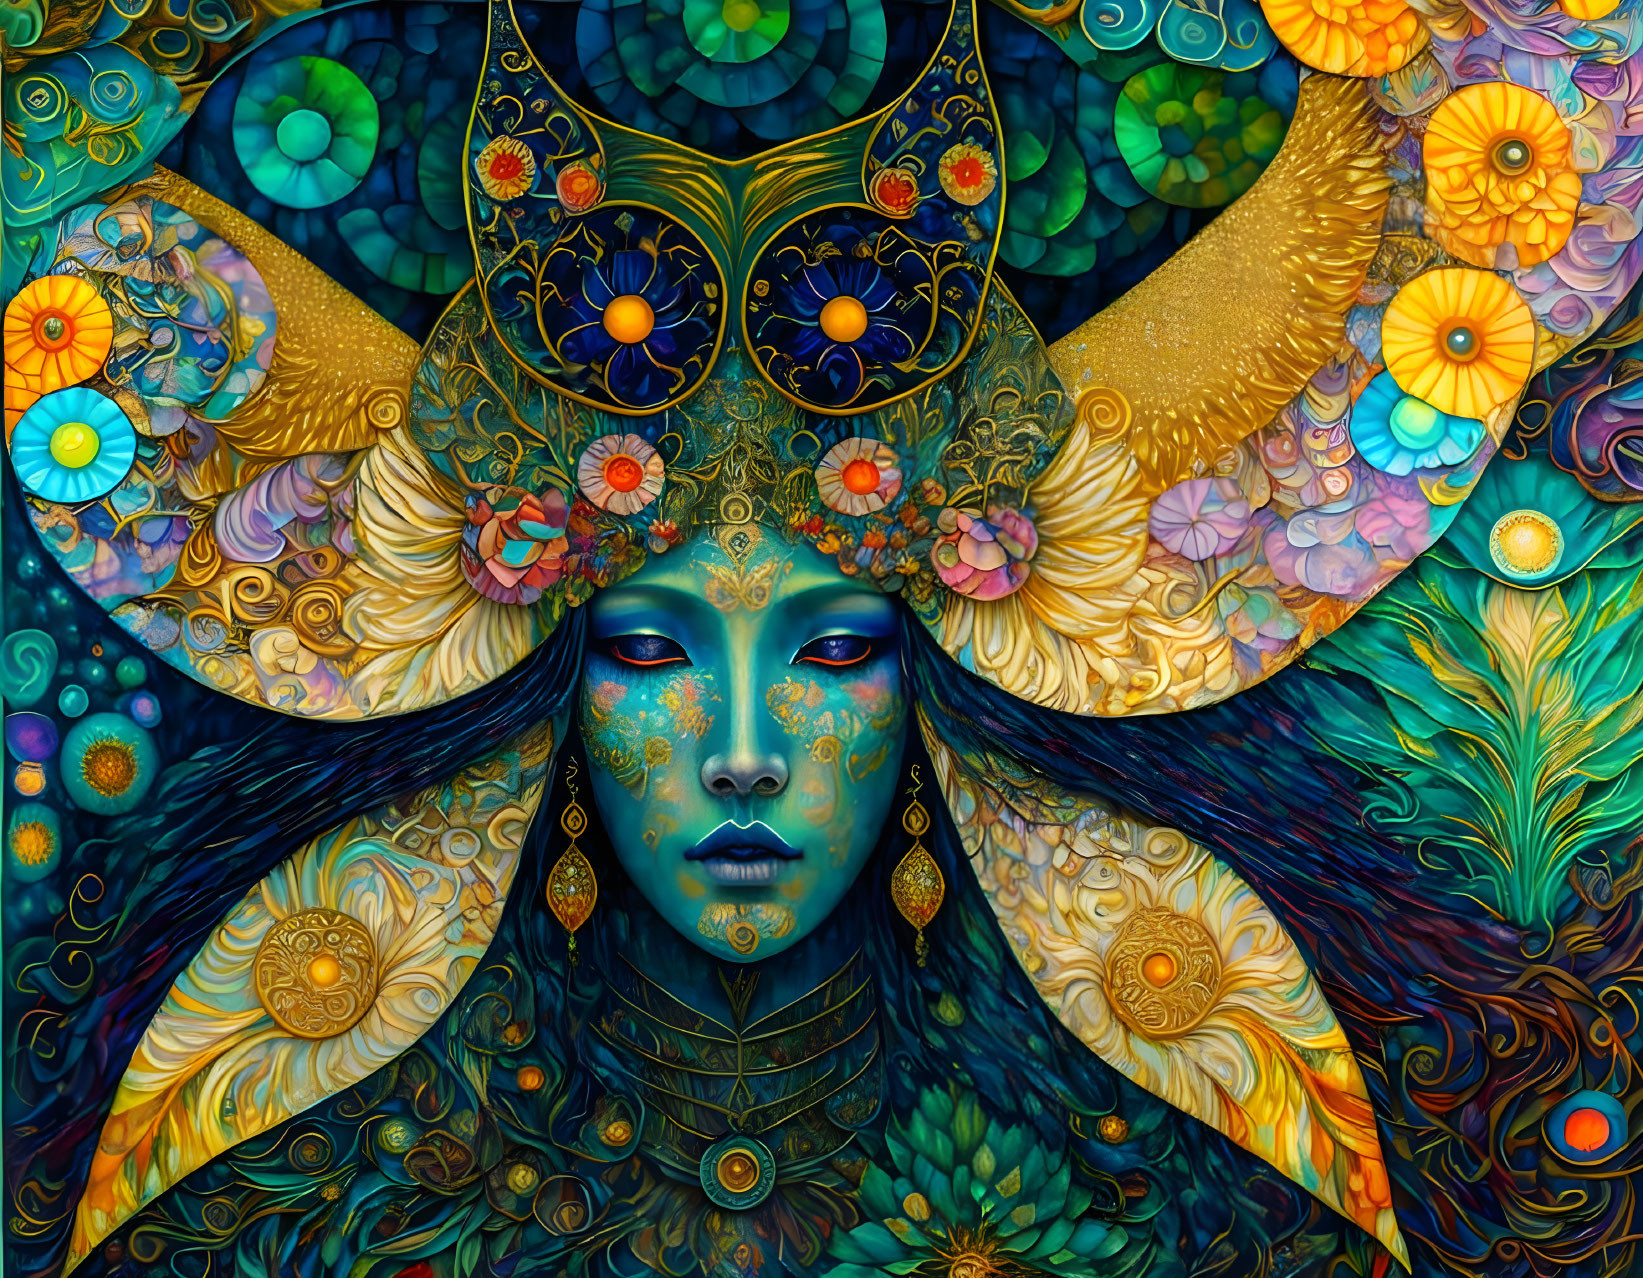 Colorful Illustration of Mystical Female Figure with Blue Skin and Golden Headgear